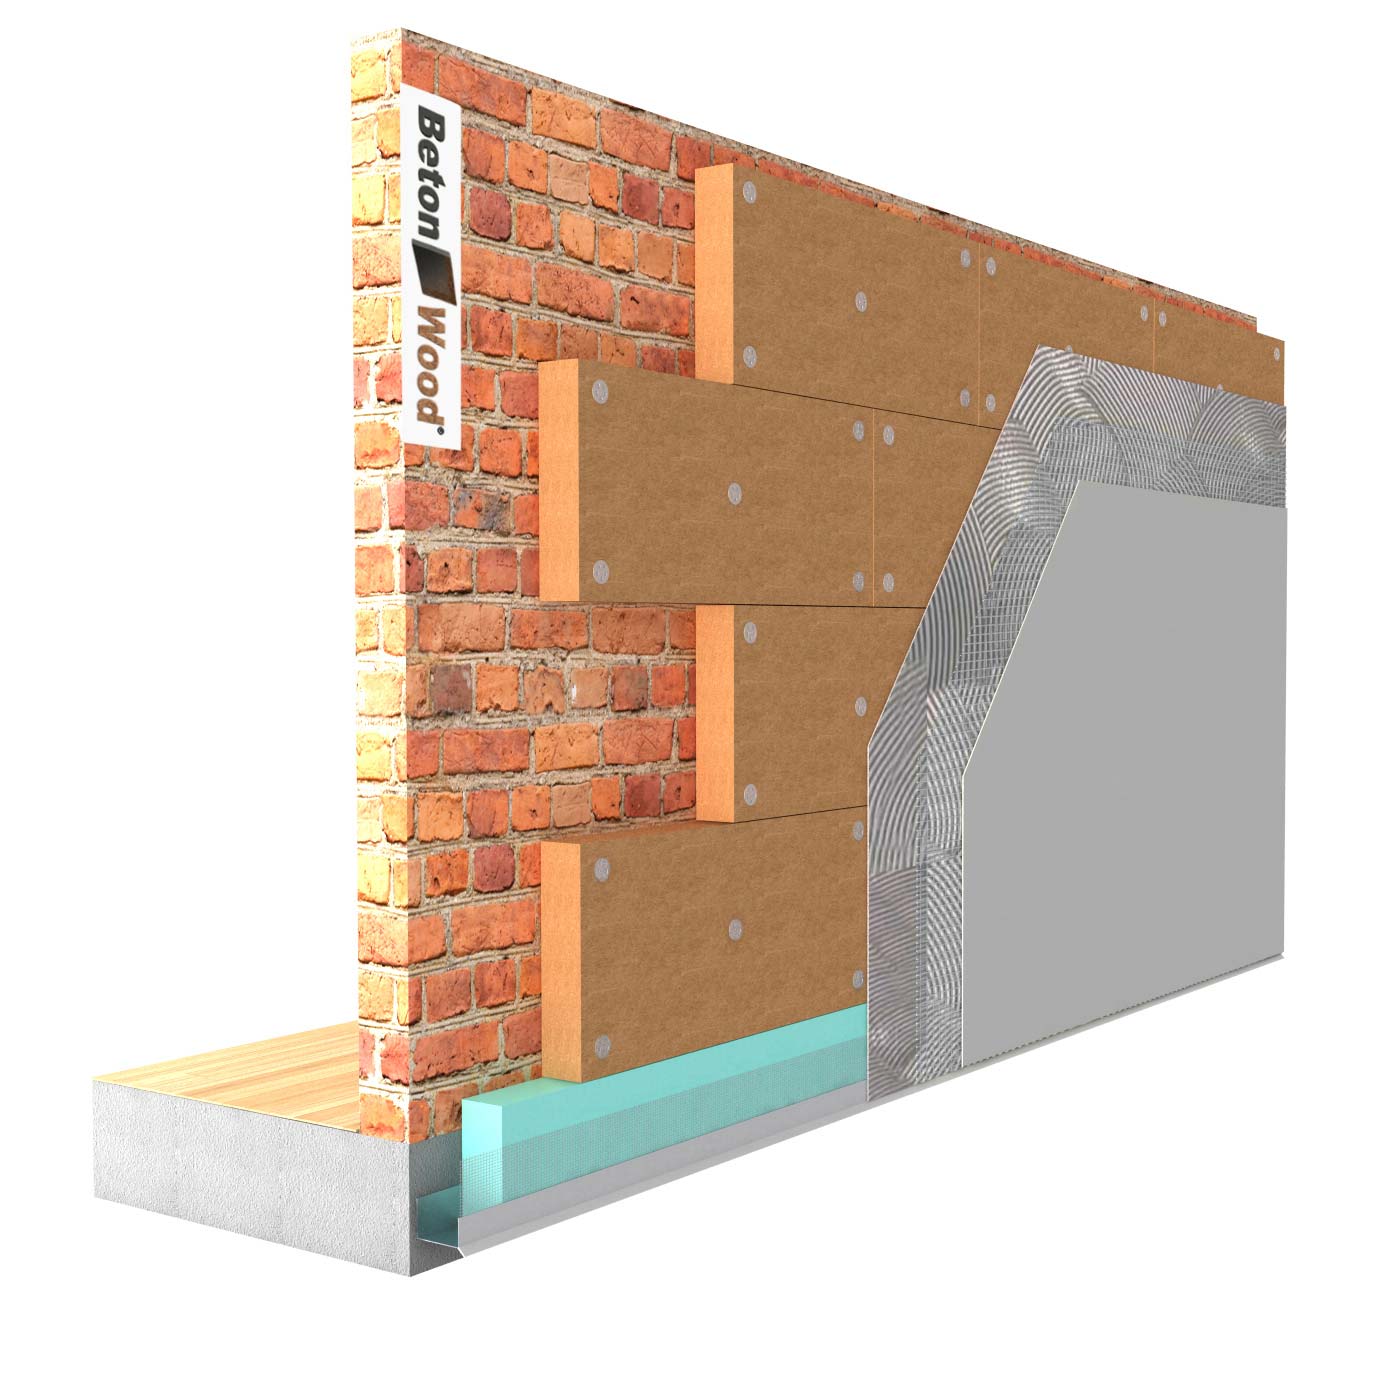 External thermal insulation system in Protect Wood fiber